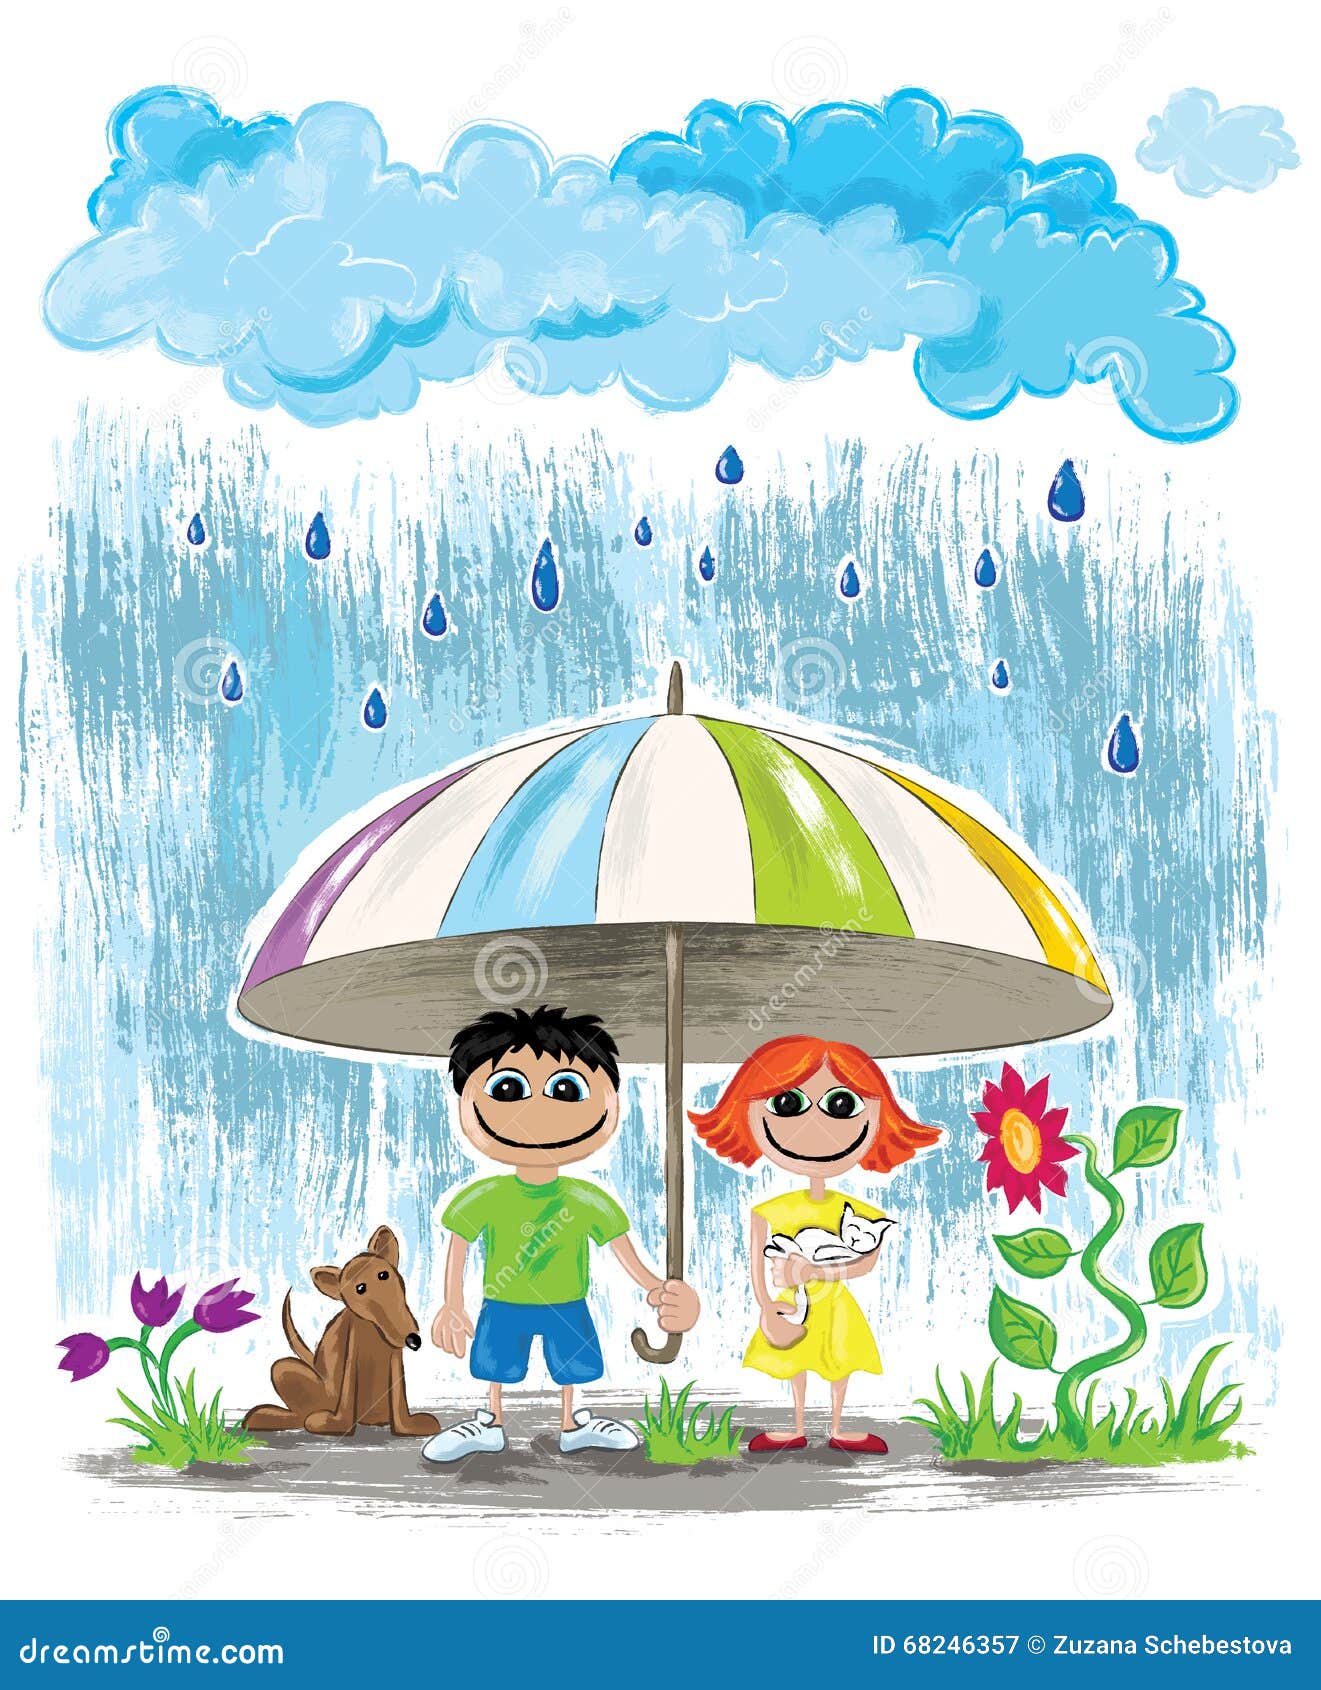 rainy day images for kids